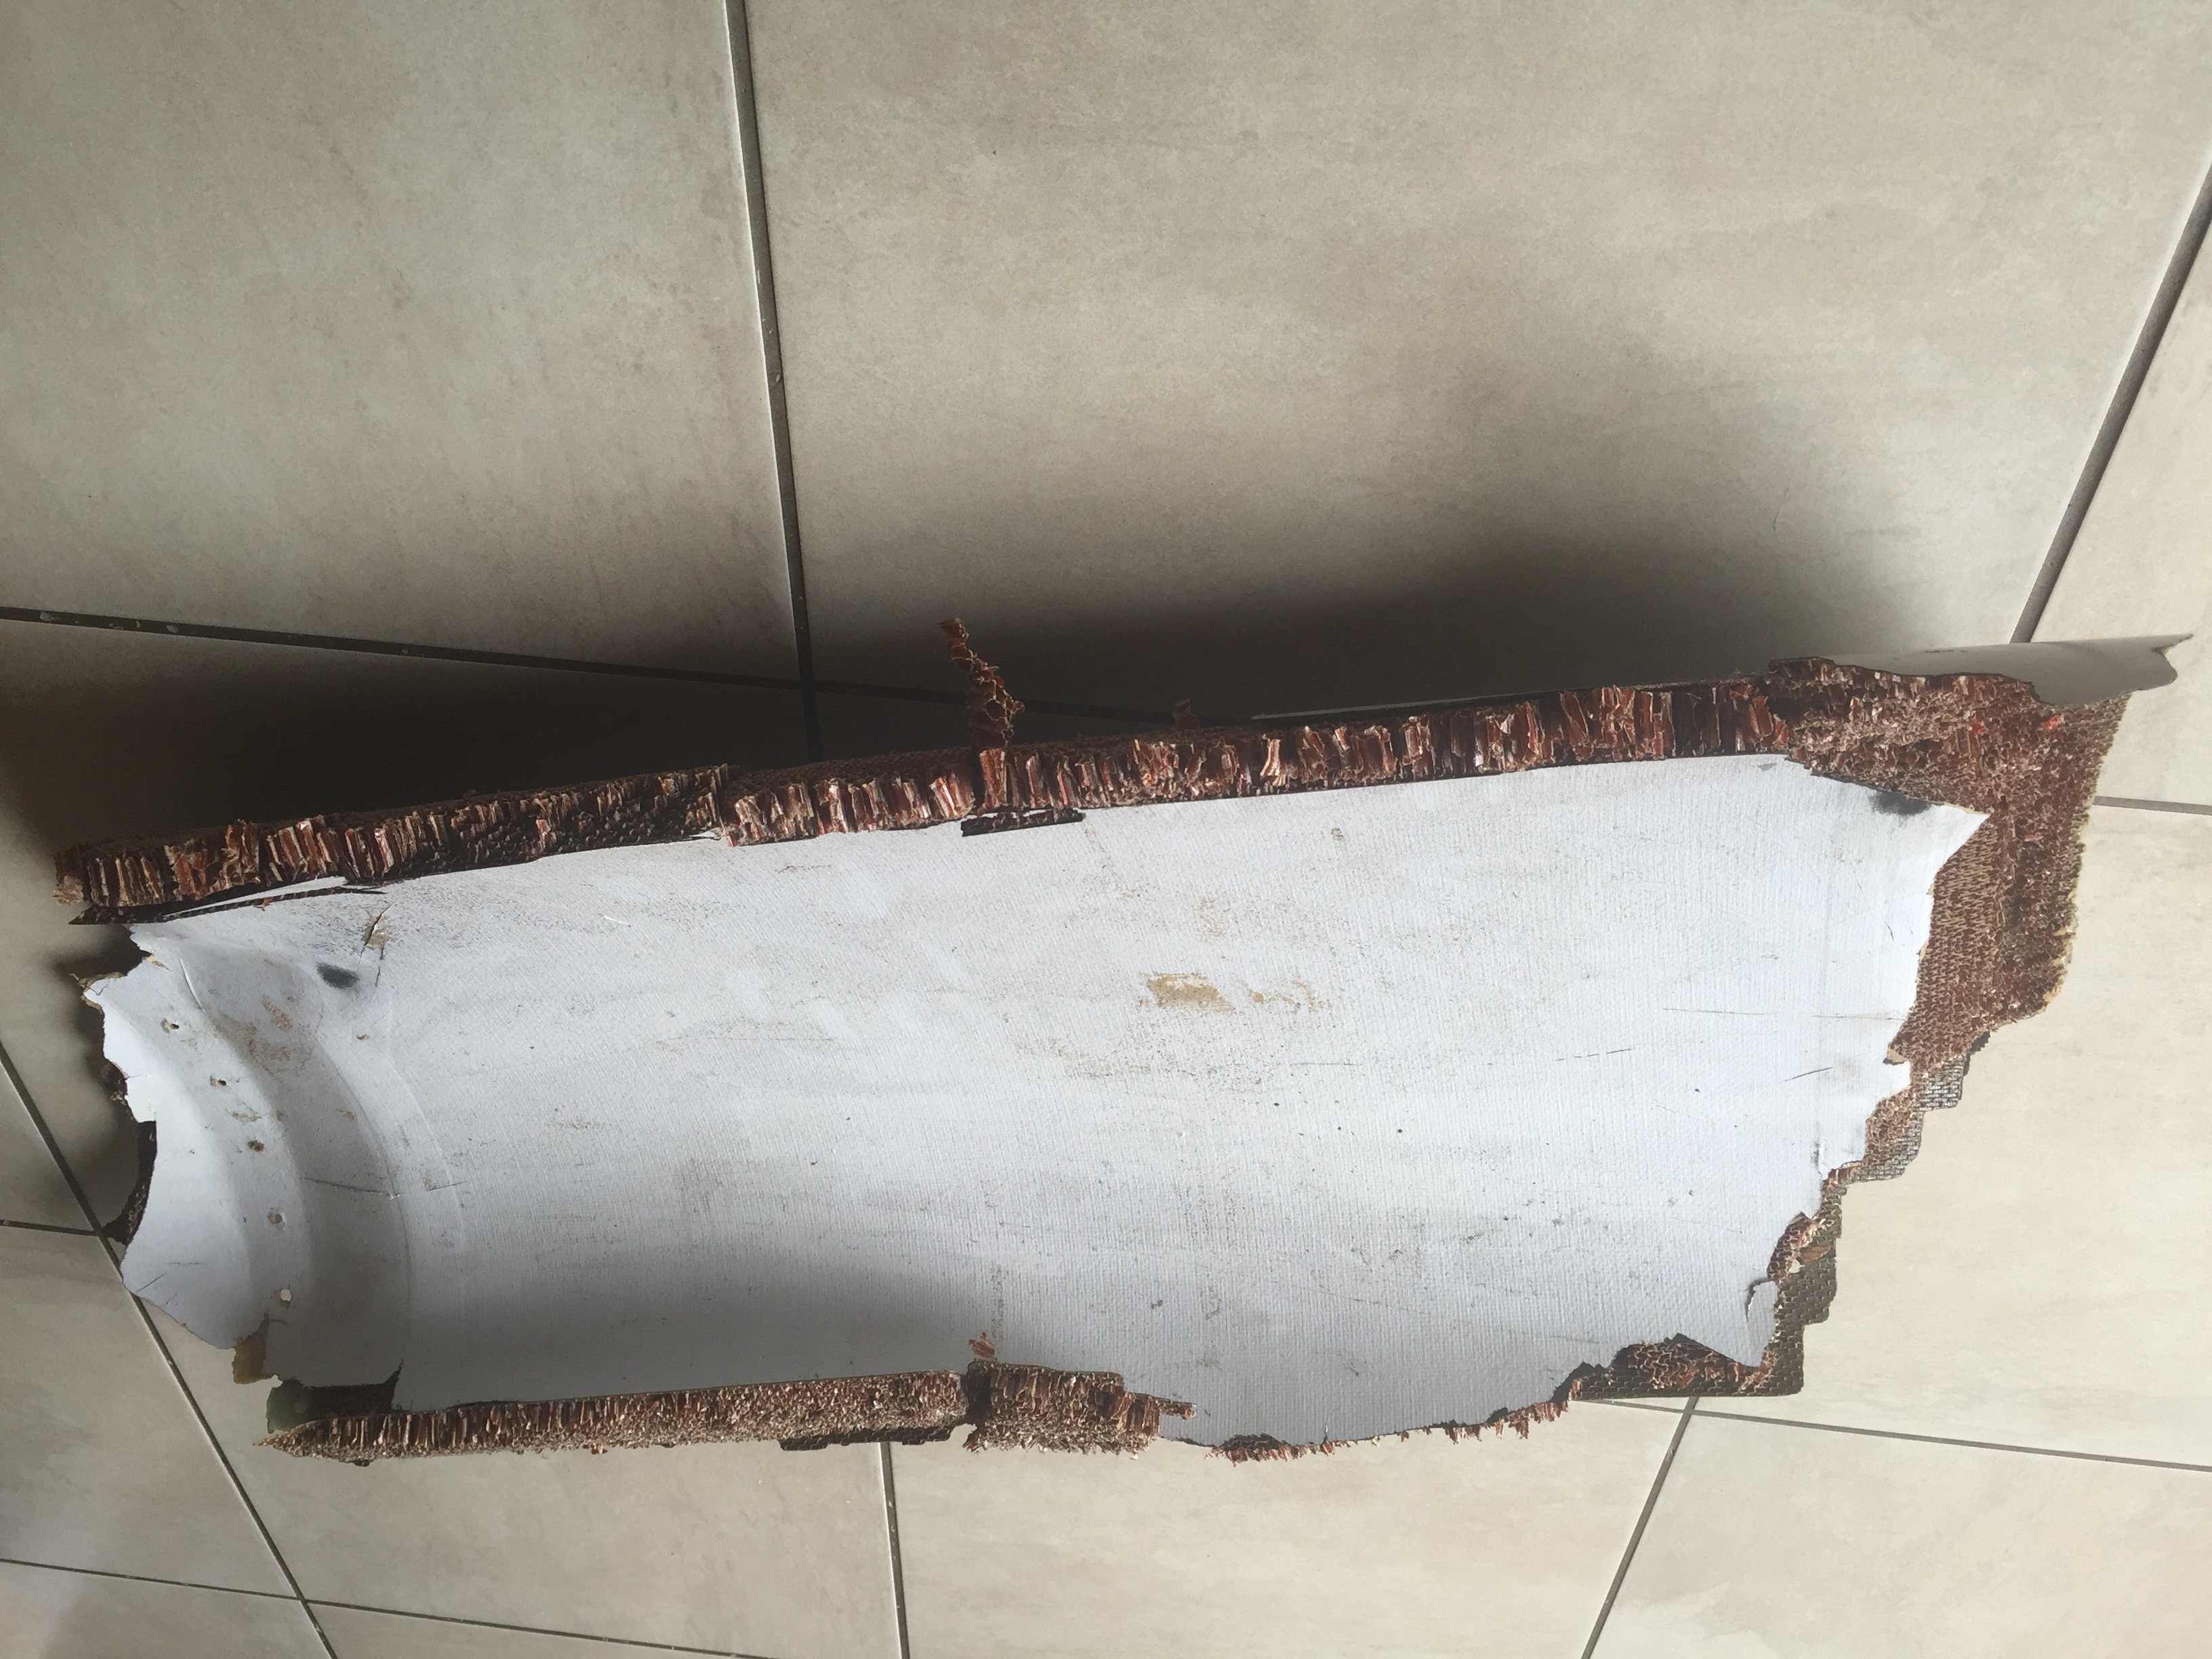 South African teen finds suspected piece of missing MH370 plane